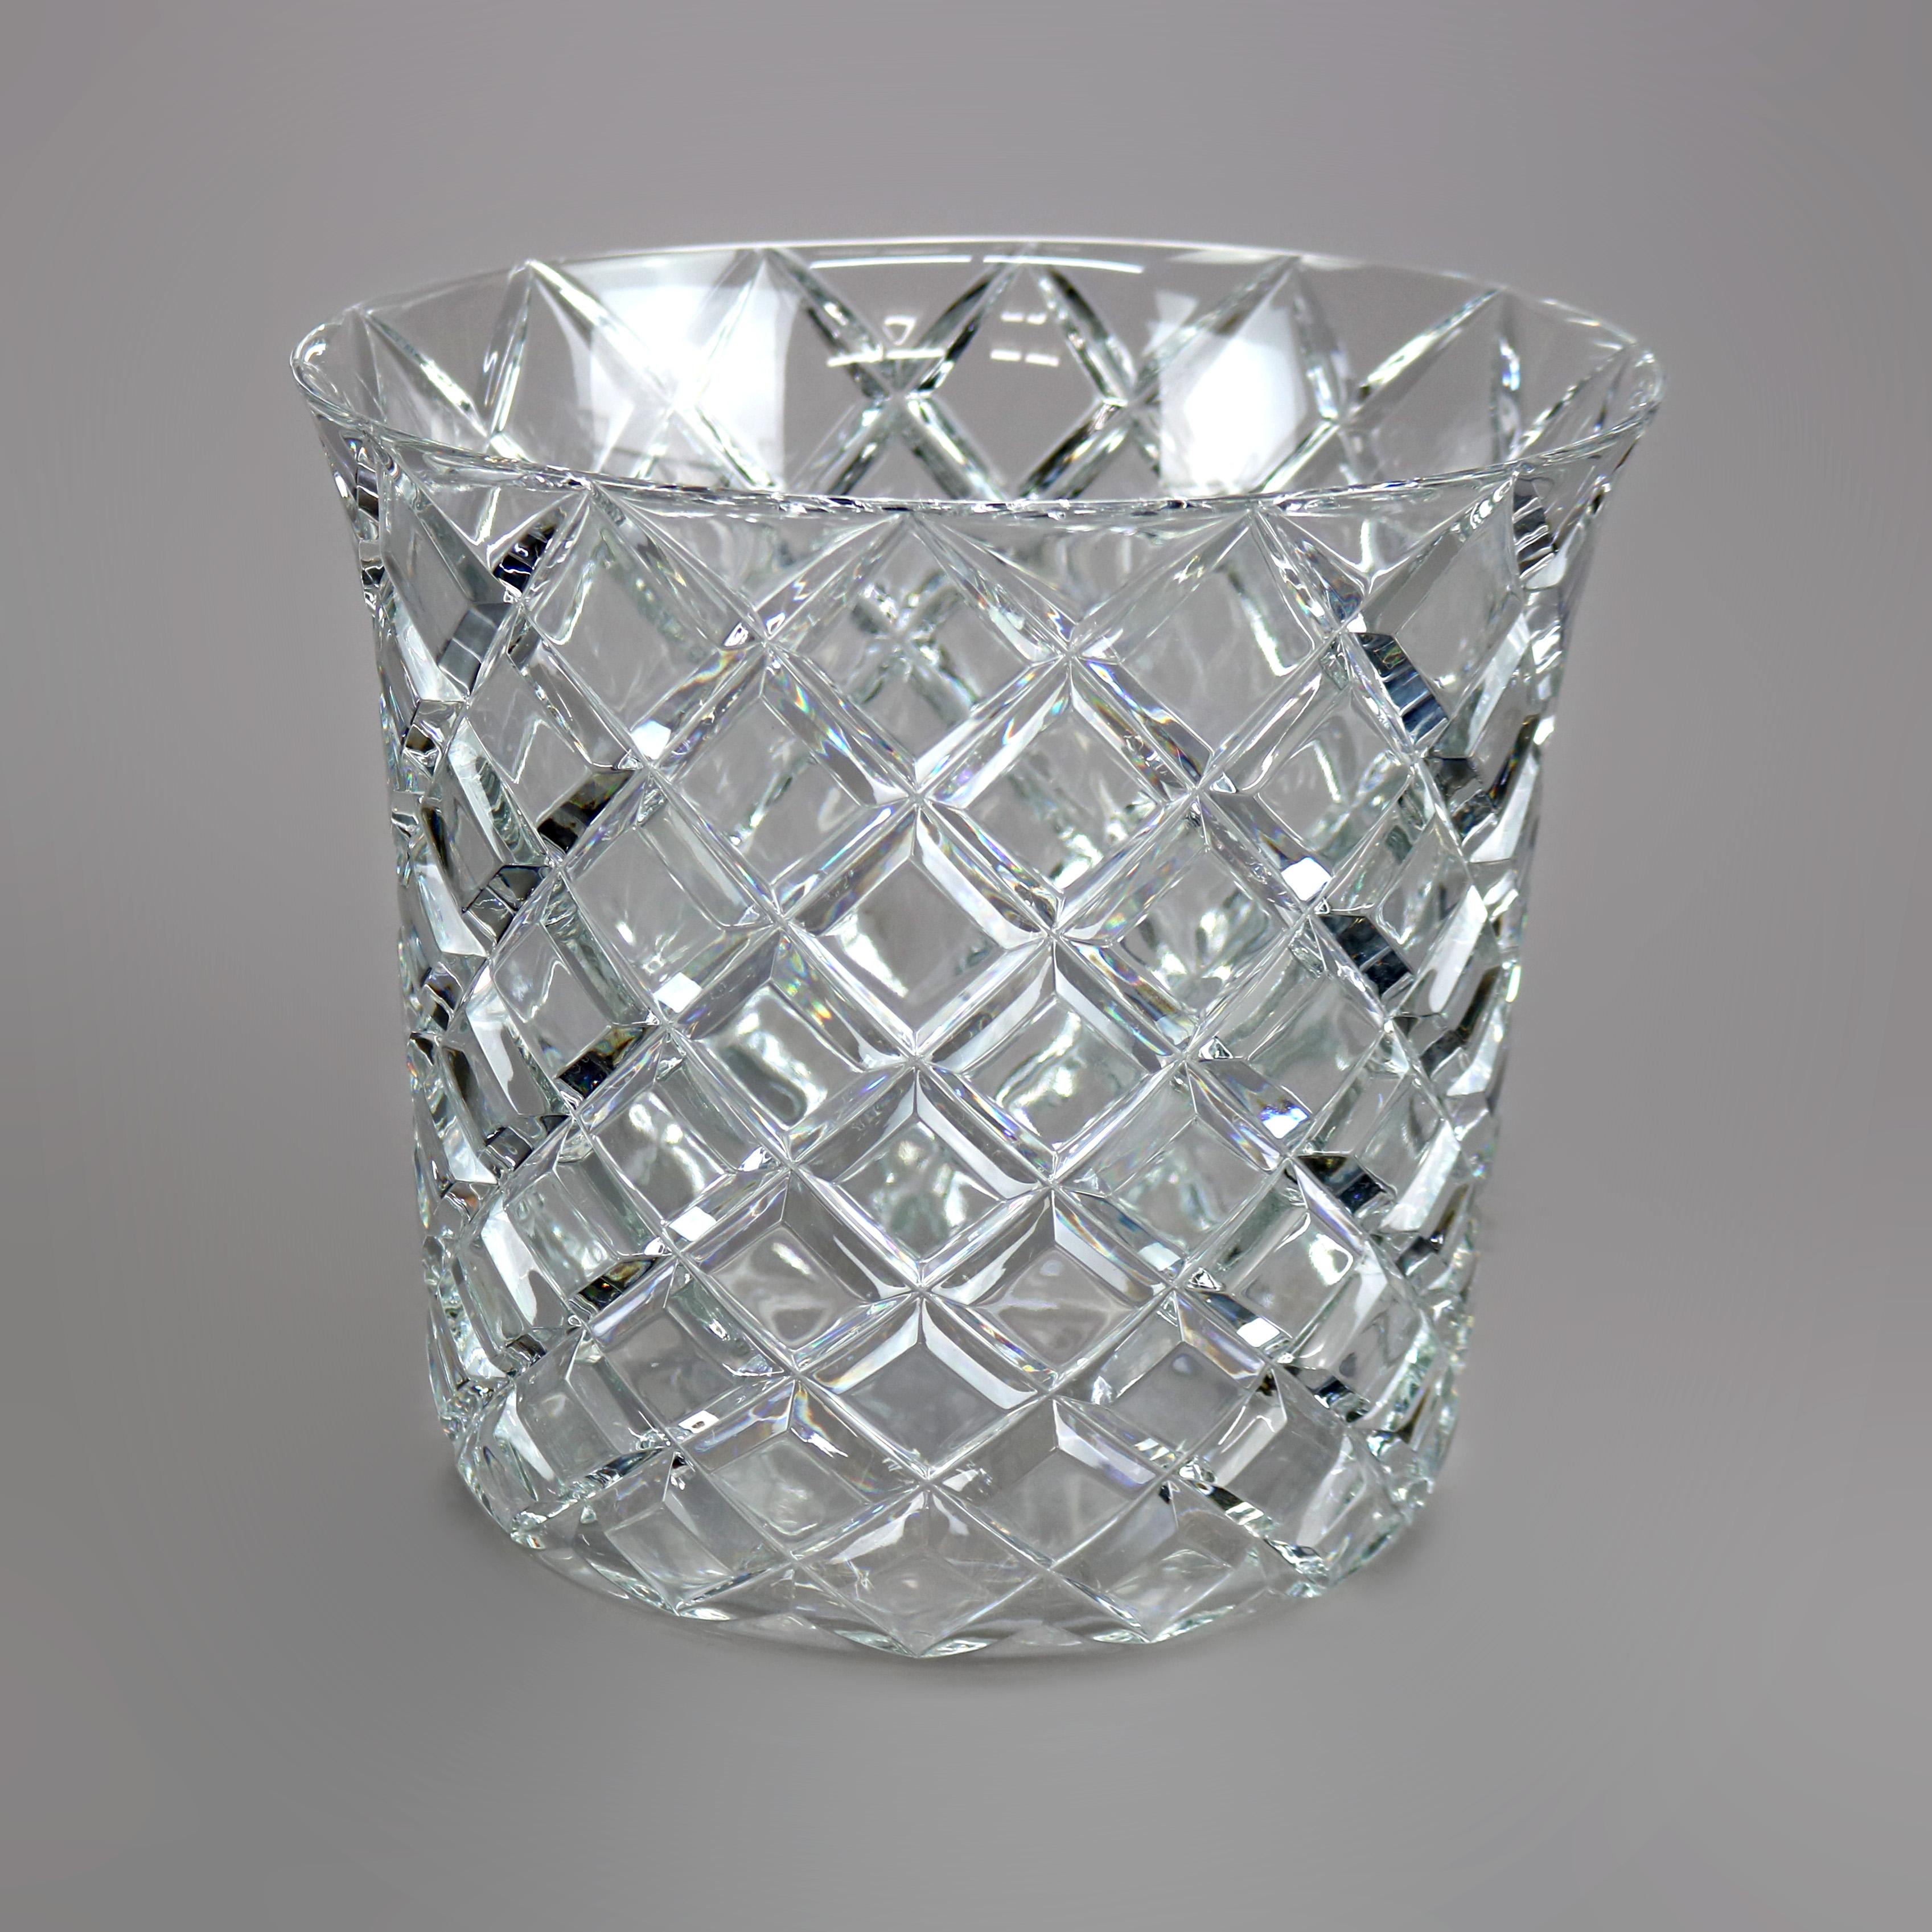 A champagne bucket in the manner of Tiffany & Co. offers lead crystal construction with diamond pattern, maker signed, 20th century

Measures - 8.5'' H x 9.25'' W x 9.25'' D.

Catalogue Note: Ask about DISCOUNTED DELIVERY RATES available to most